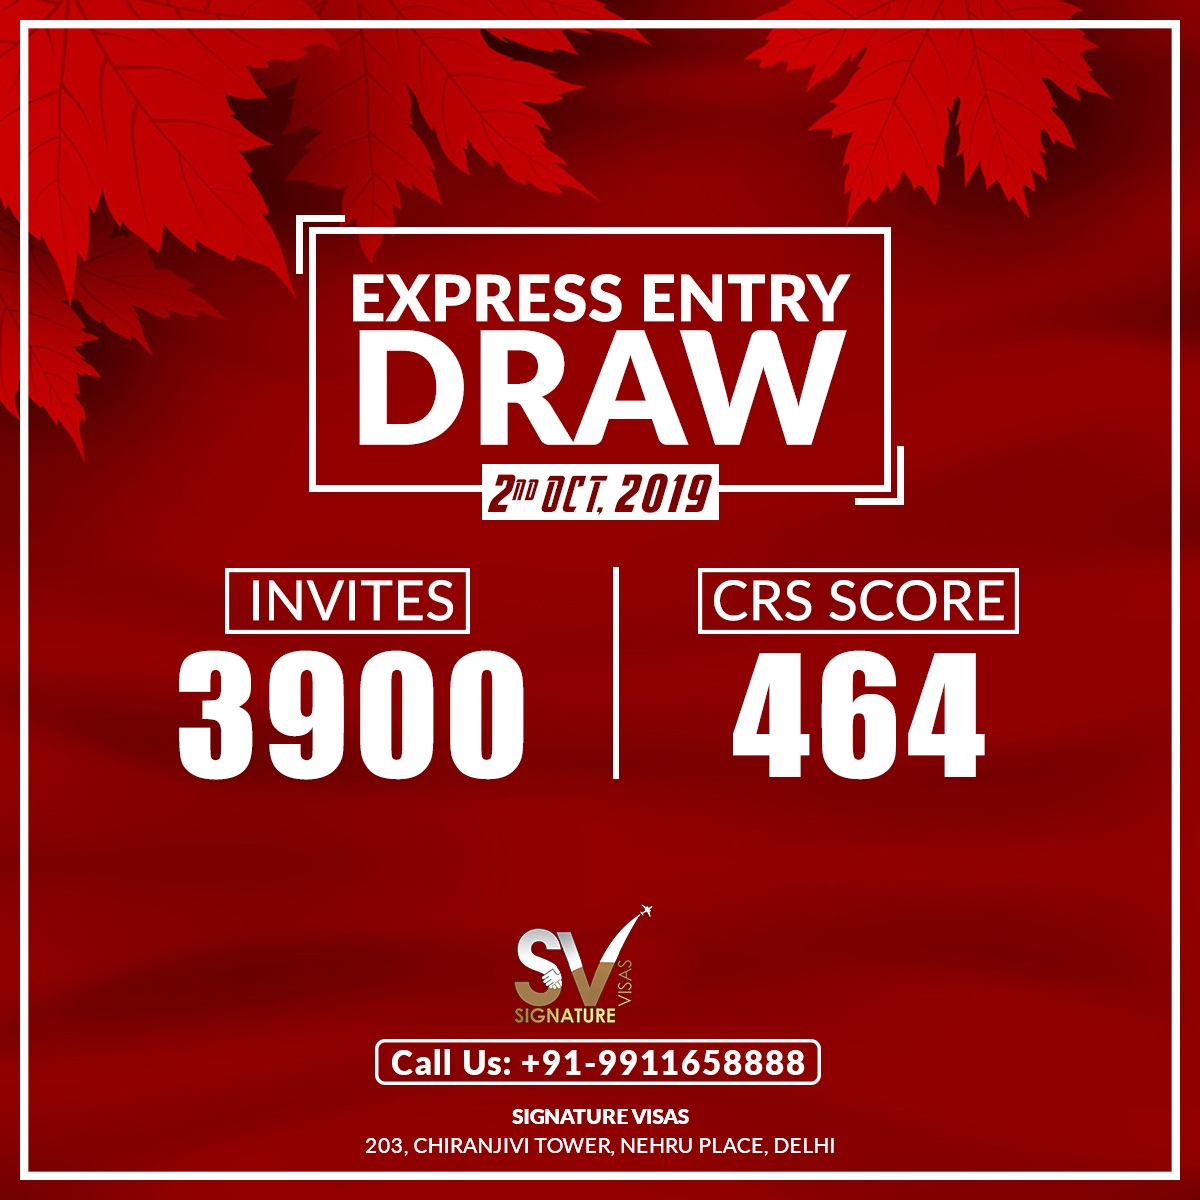 Express Entry draw issued 1,000 invitations to apply for PR-saigonsouth.com.vn